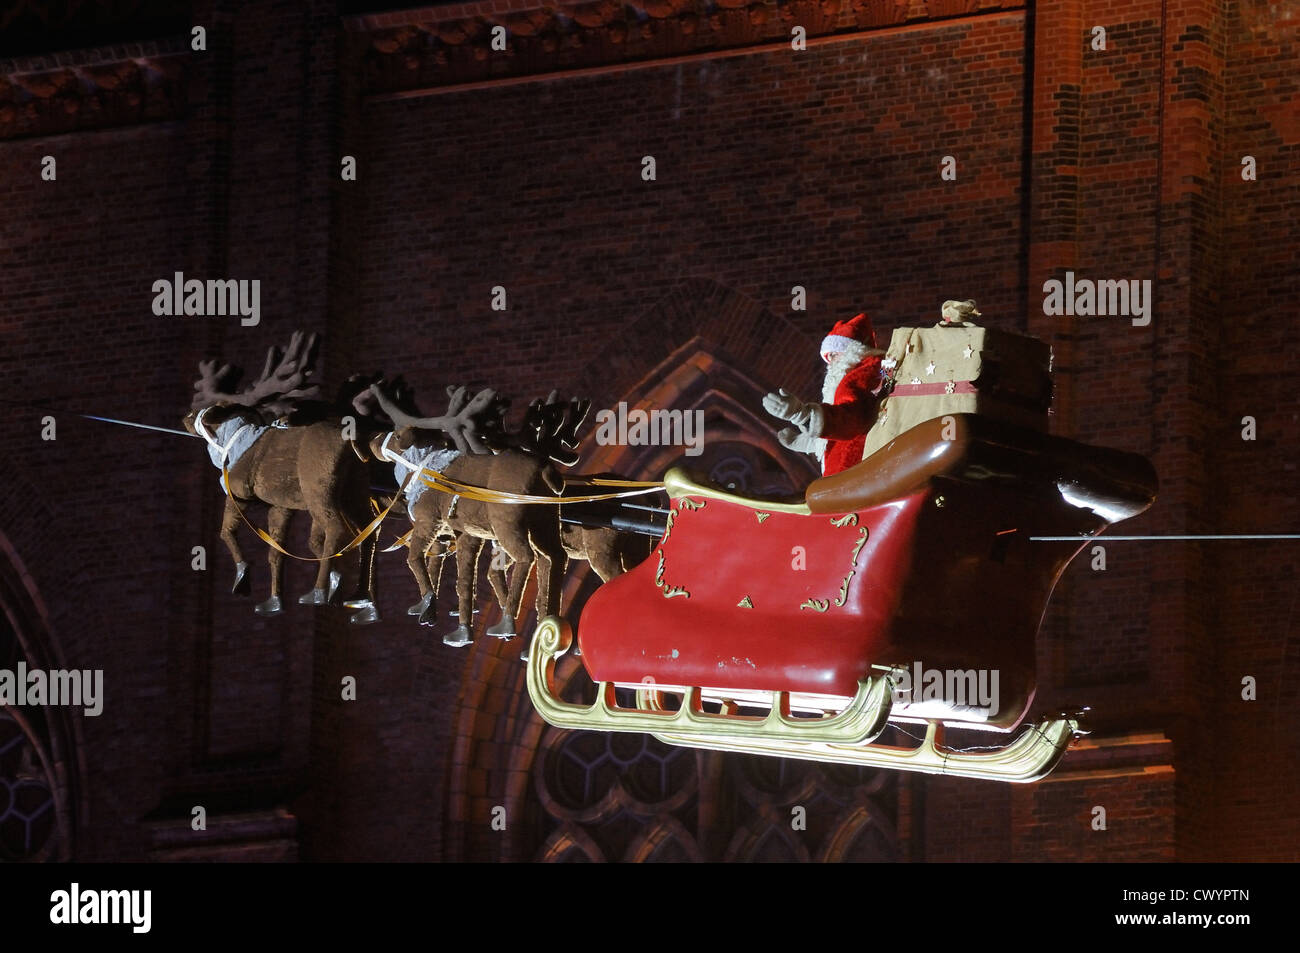 Santa Claus in his sleigh flying on Christmas market at Opernpalais in front of Friedrichwerdersche Kirche, Berlin, Germany. Stock Photo